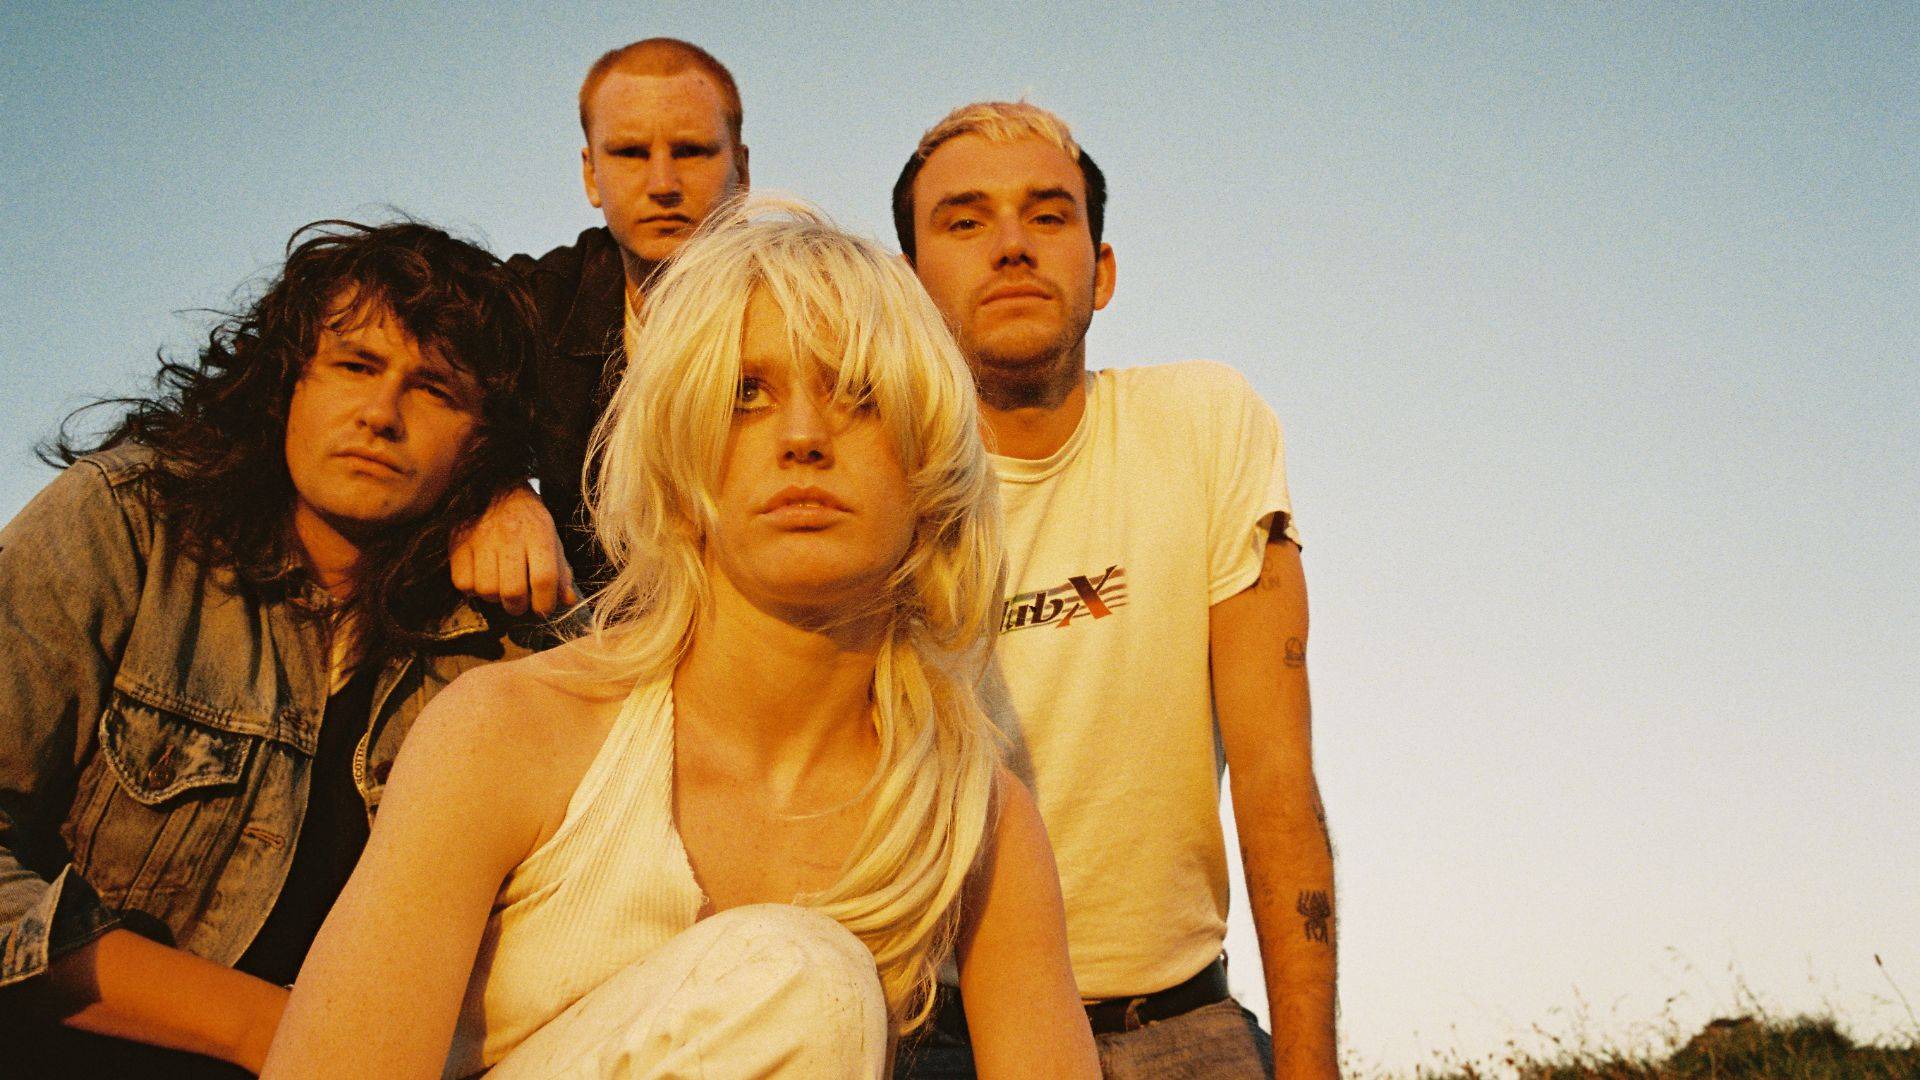 Amyl and The Sniffers band Comfort To Me posing together sunset